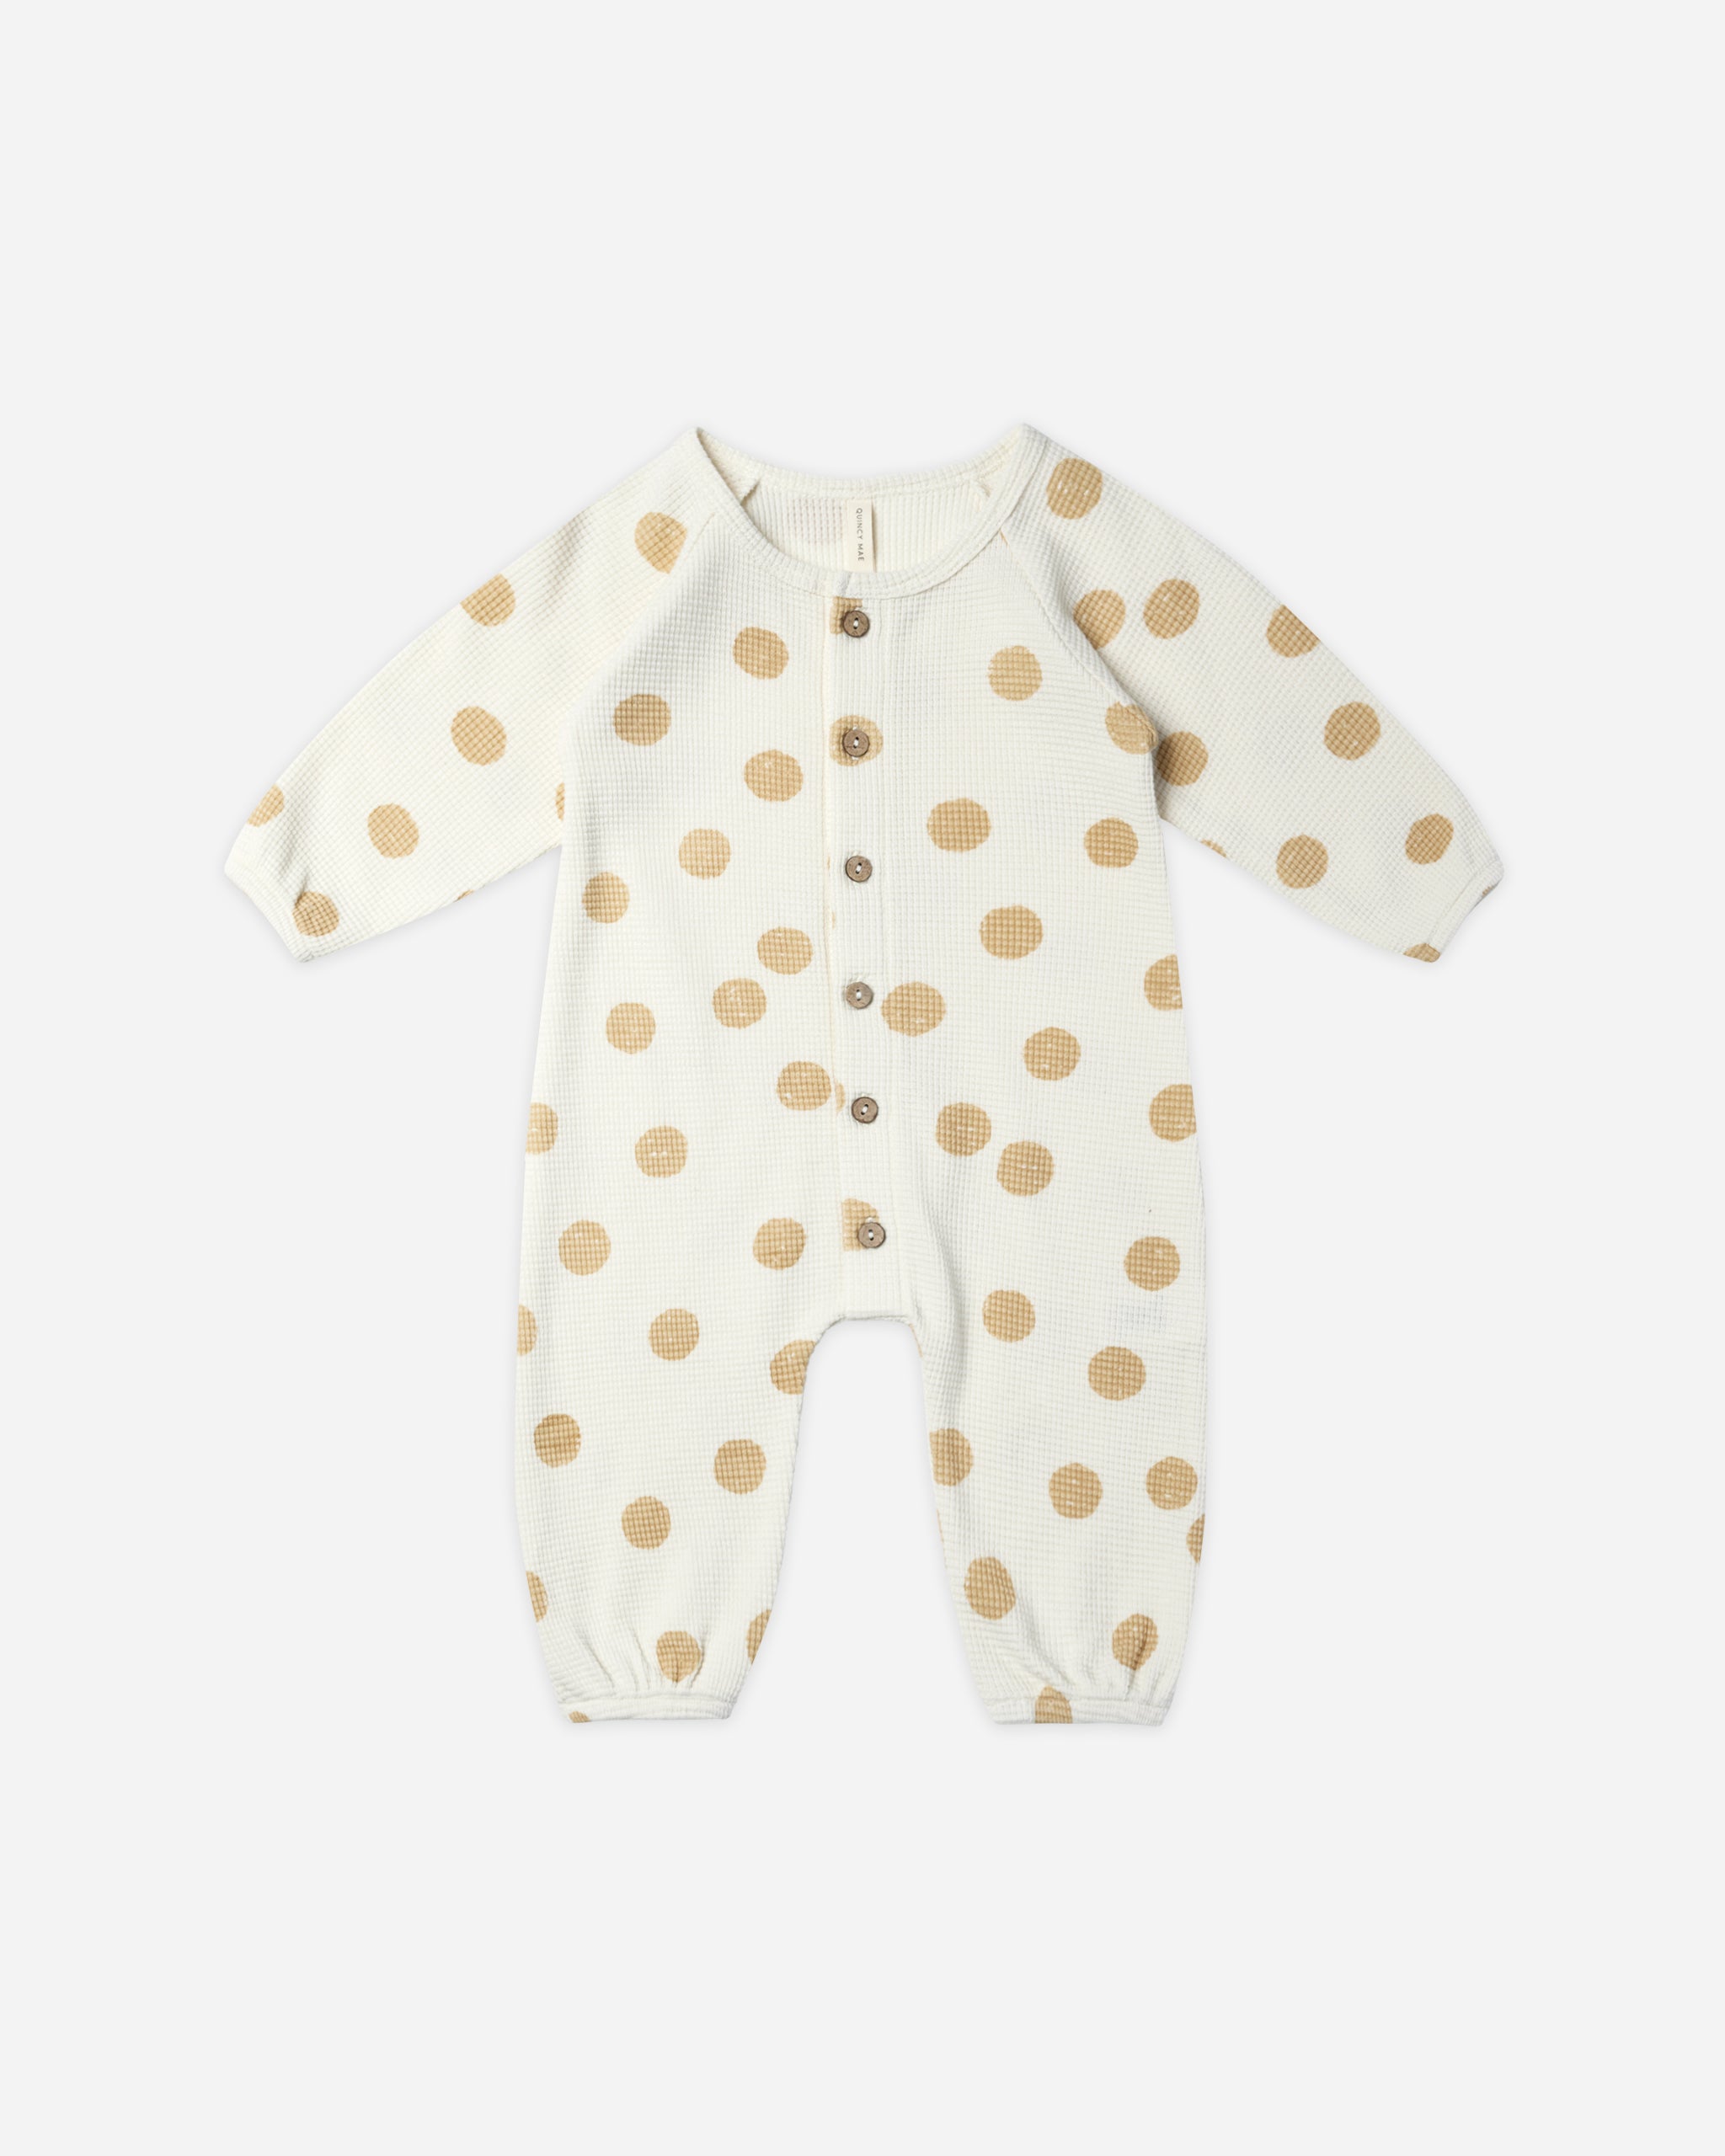 Waffle Long Sleeve Jumpsuit || Butter Dots - Rylee + Cru | Kids Clothes | Trendy Baby Clothes | Modern Infant Outfits |